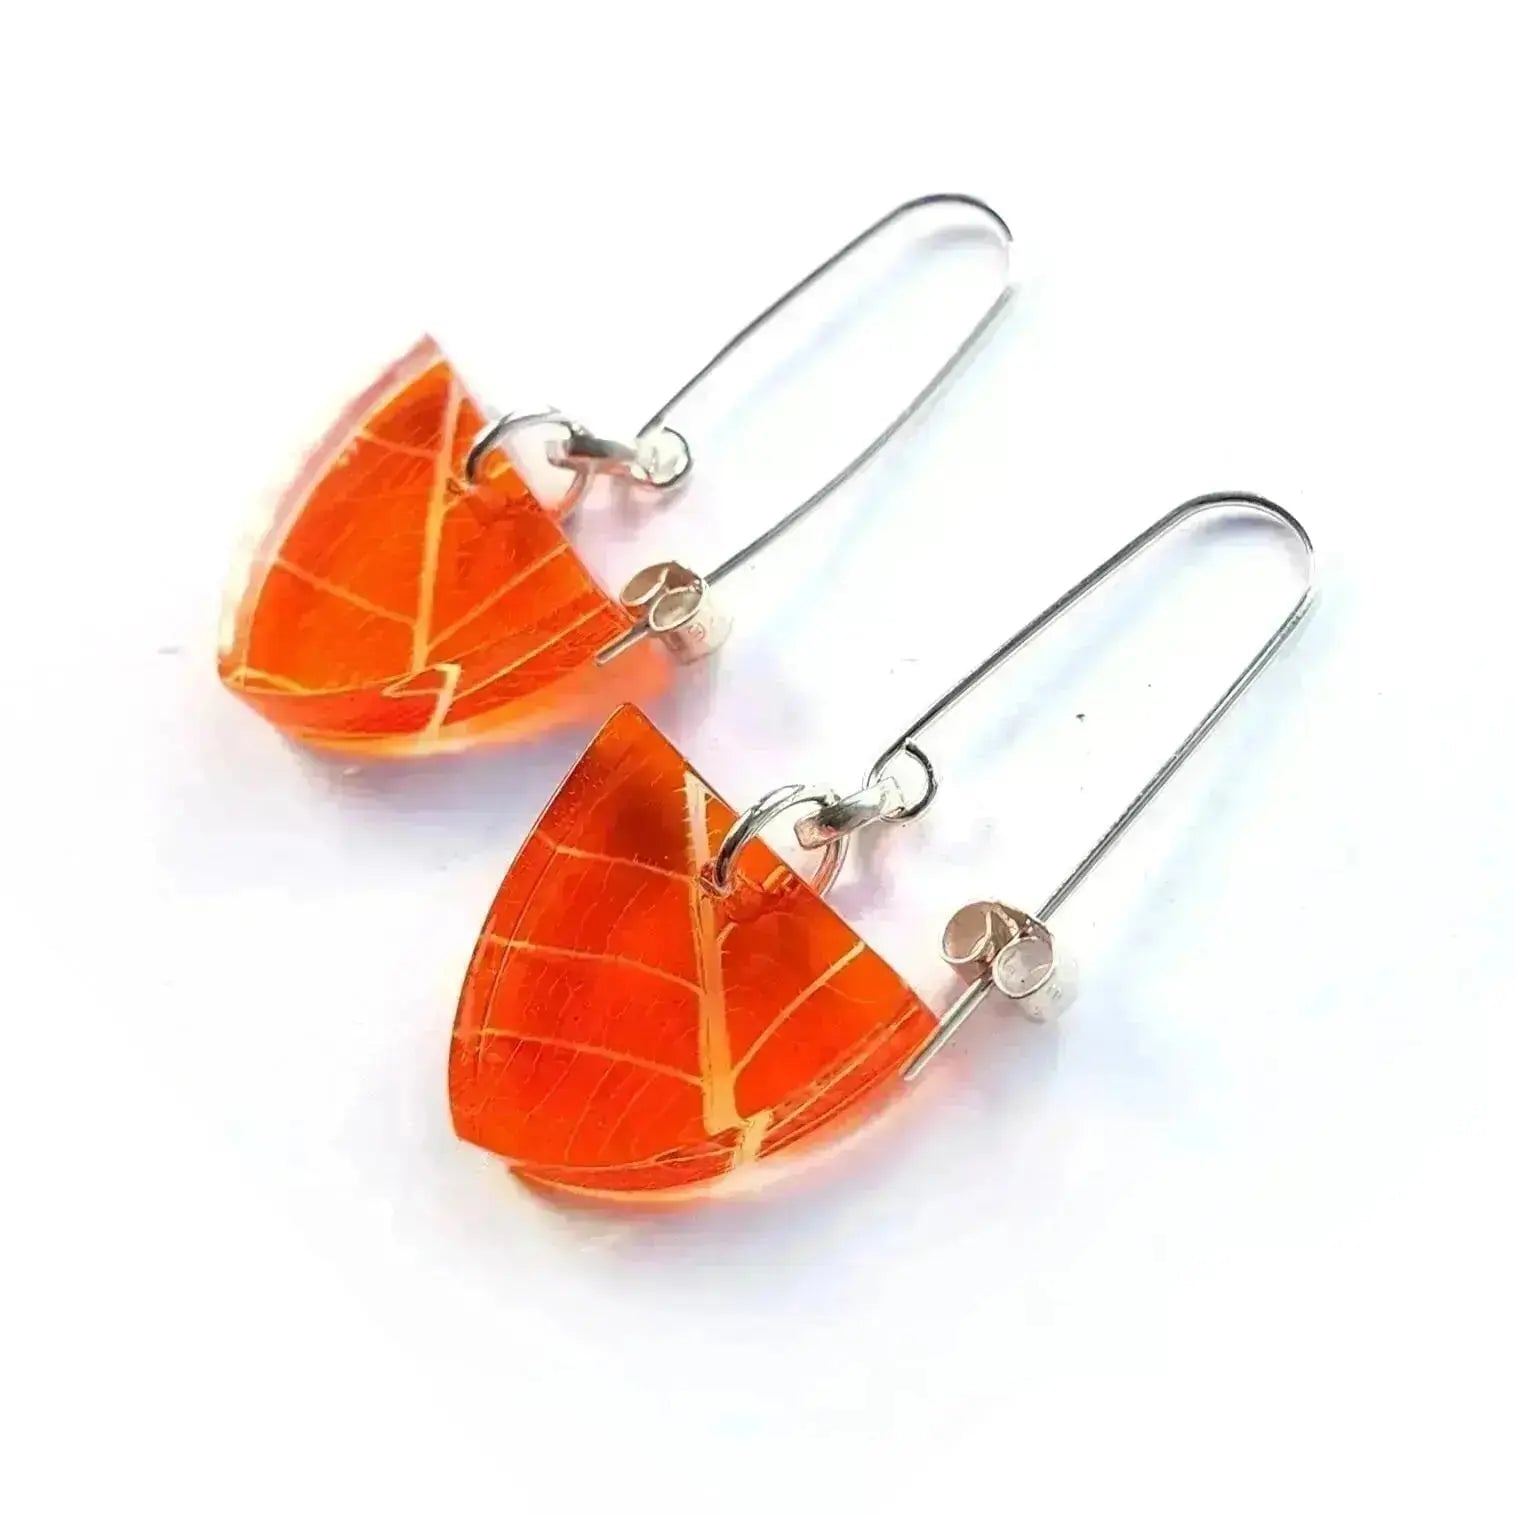 https://cdn.shopify.com/s/files/1/0013/2132/products/turmeric-skeleton-leaf-triangle-recycled-plastic-earrings-earring-sue-gregor-120184.jpg?crop=center&height=2048&v=1697235812&width=2048